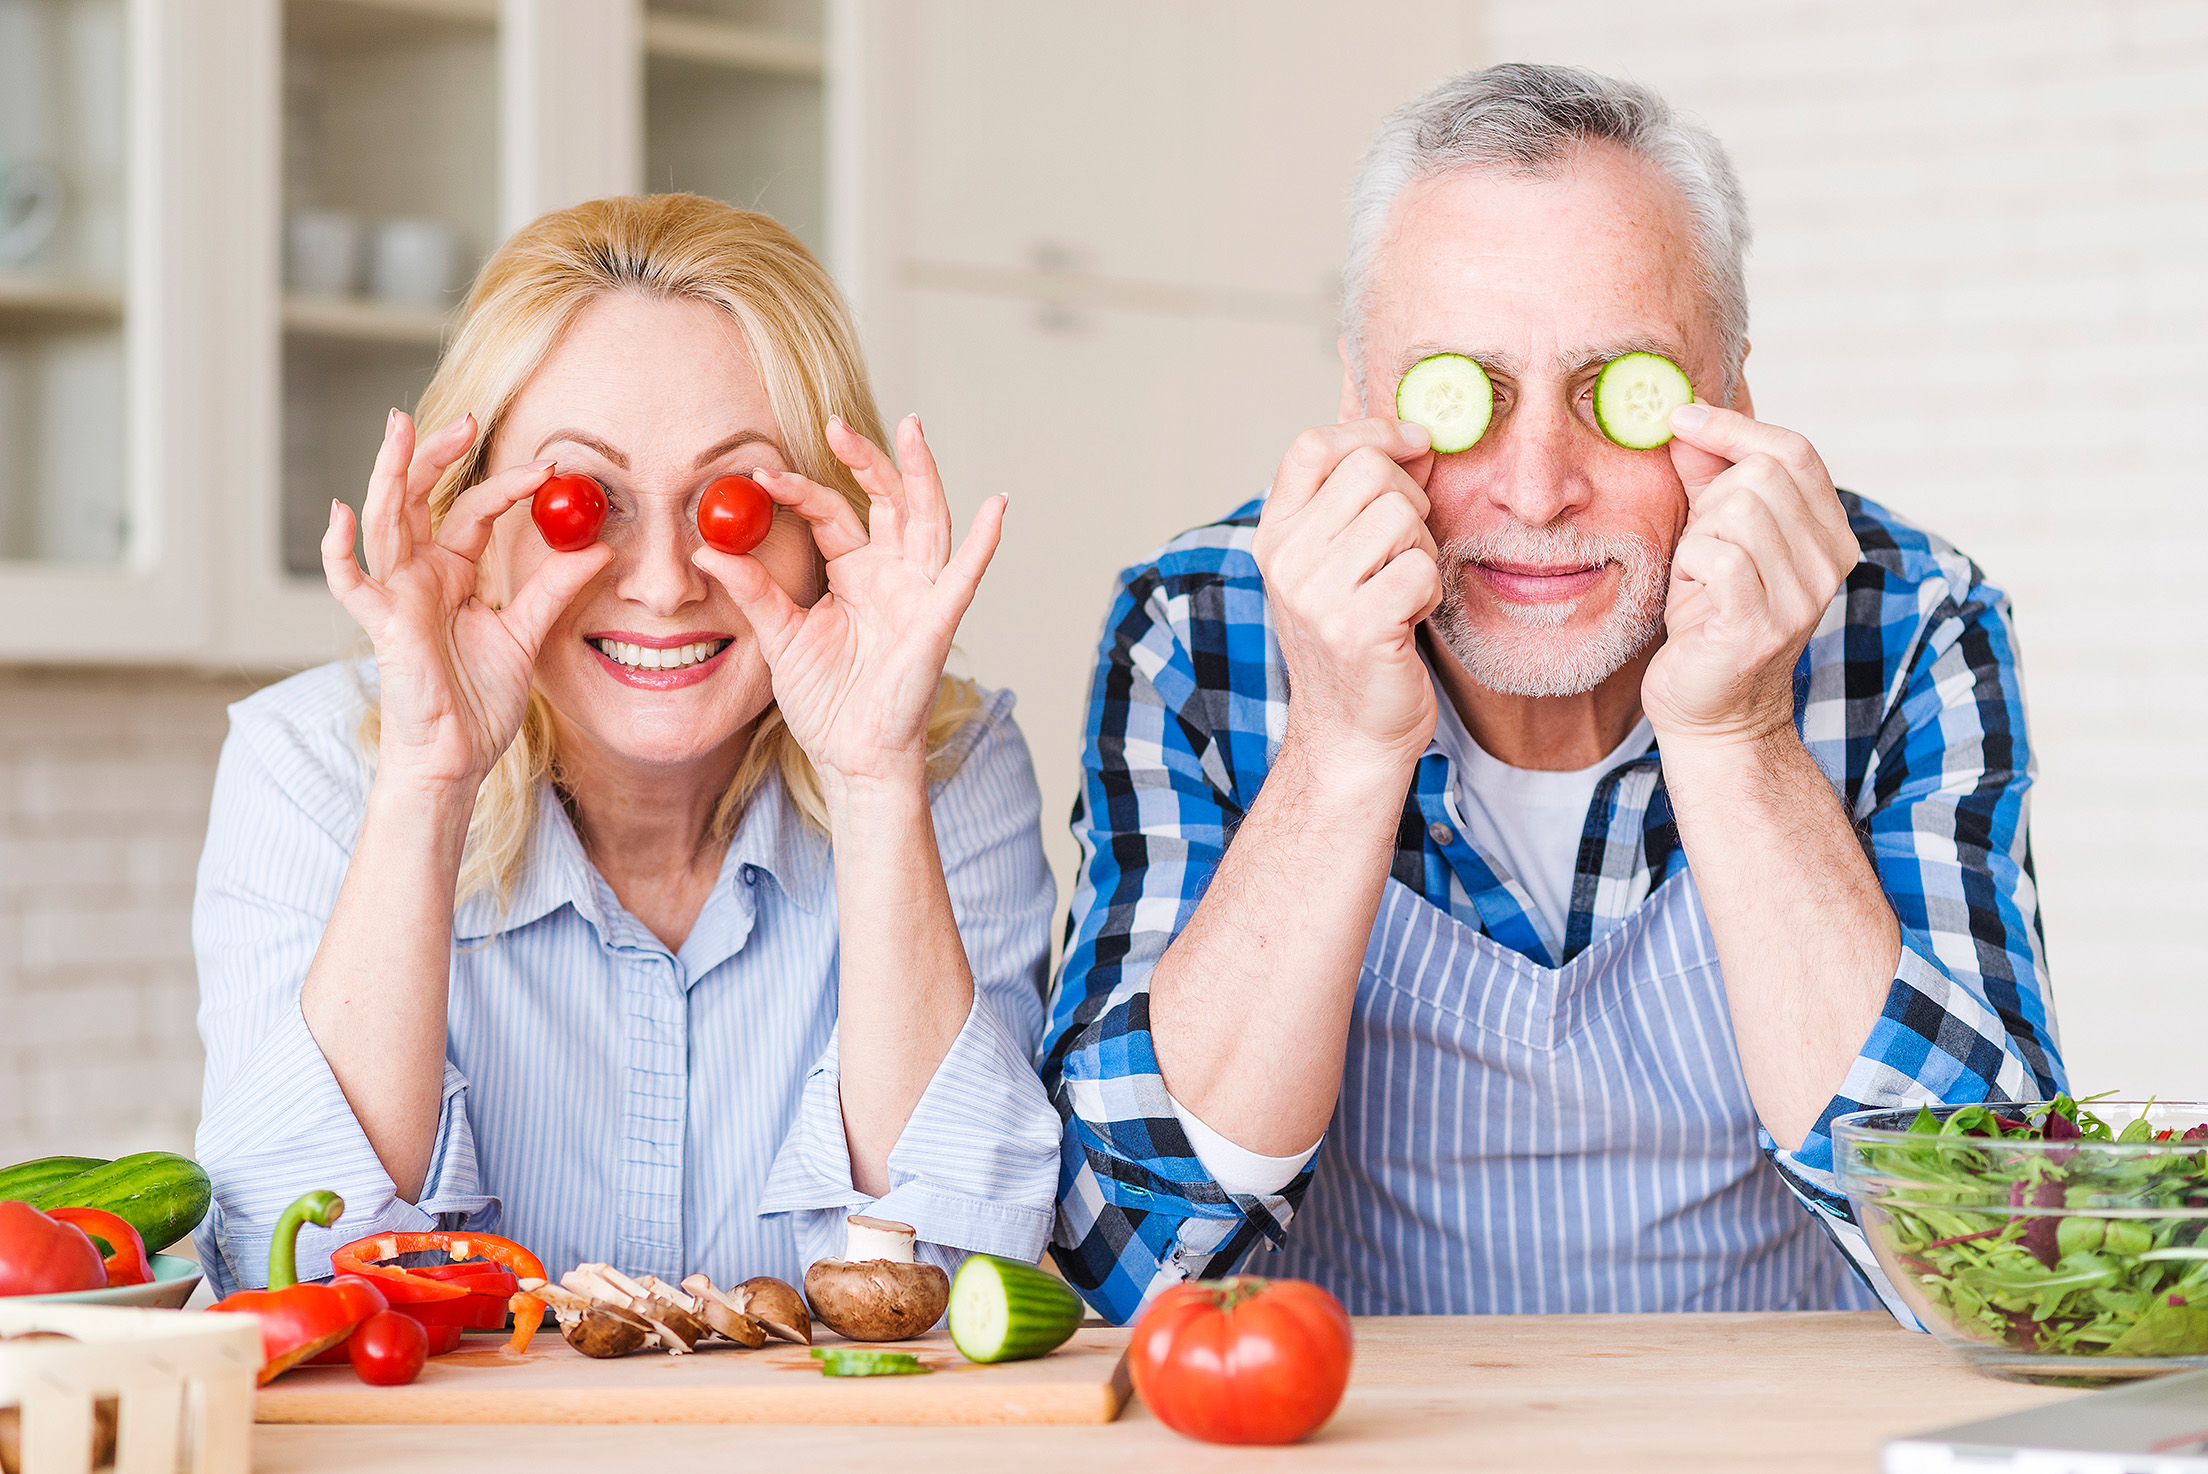 An elderly couple holding vegetables over their eyes. Showcasing nutritious foods for older adults